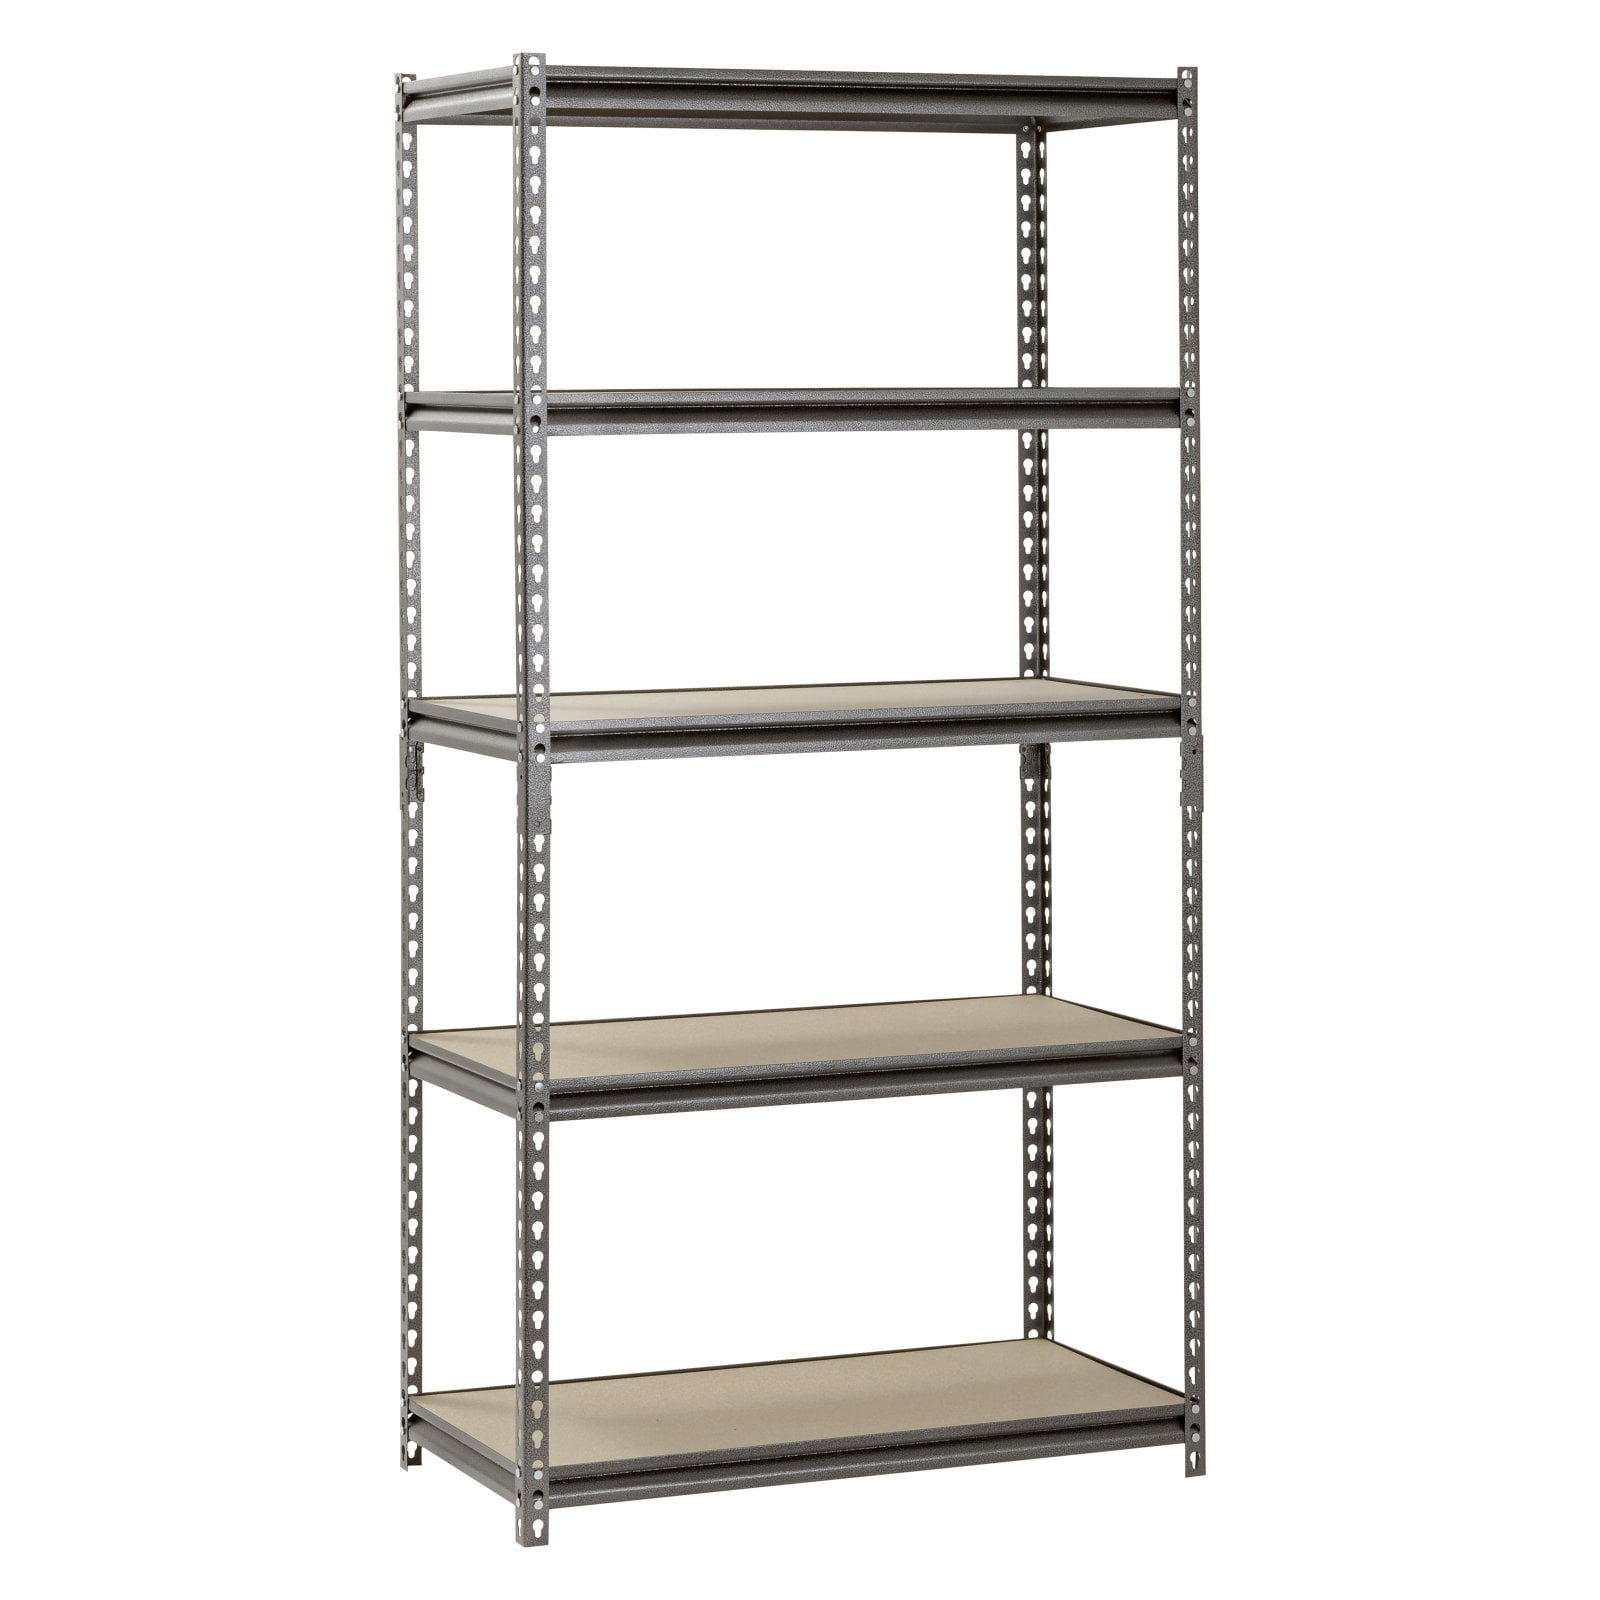 Details about   64x30x30cm Real Chrome Wire Rack Metal Steel Kitchen Garage Shelving Racks S247 